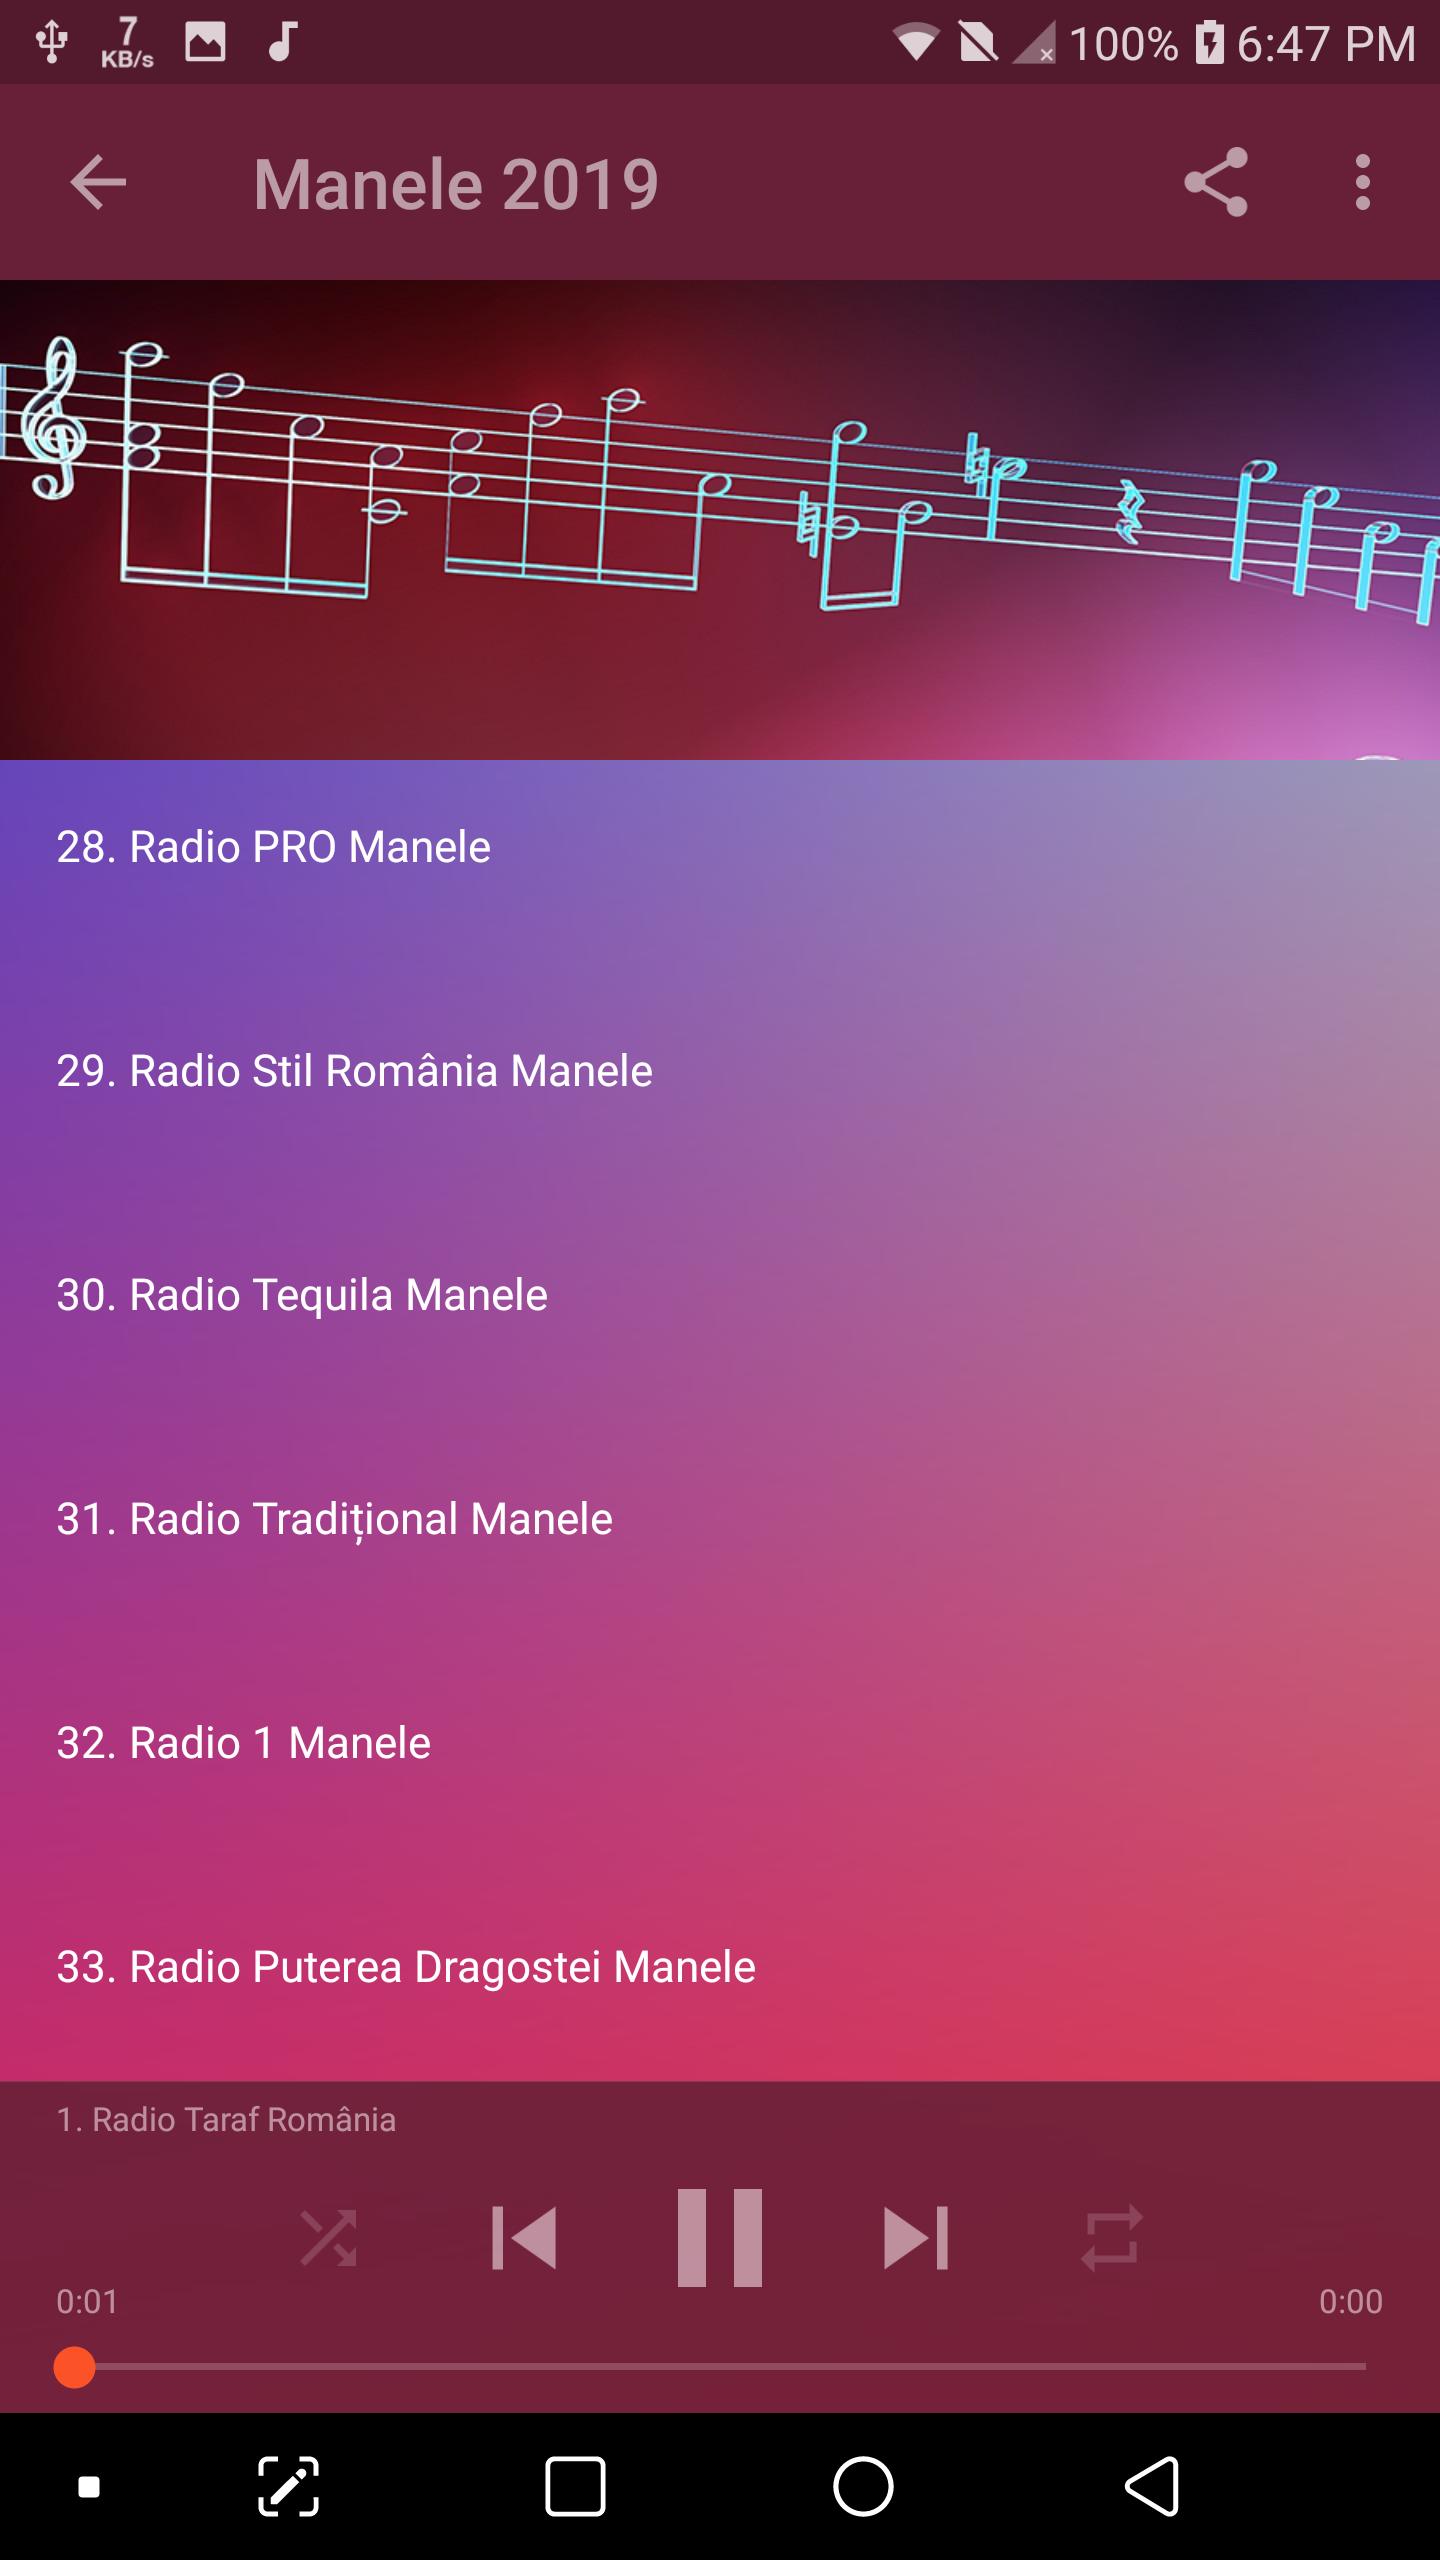 Radio Manele Petrecere 2019 for Android - APK Download